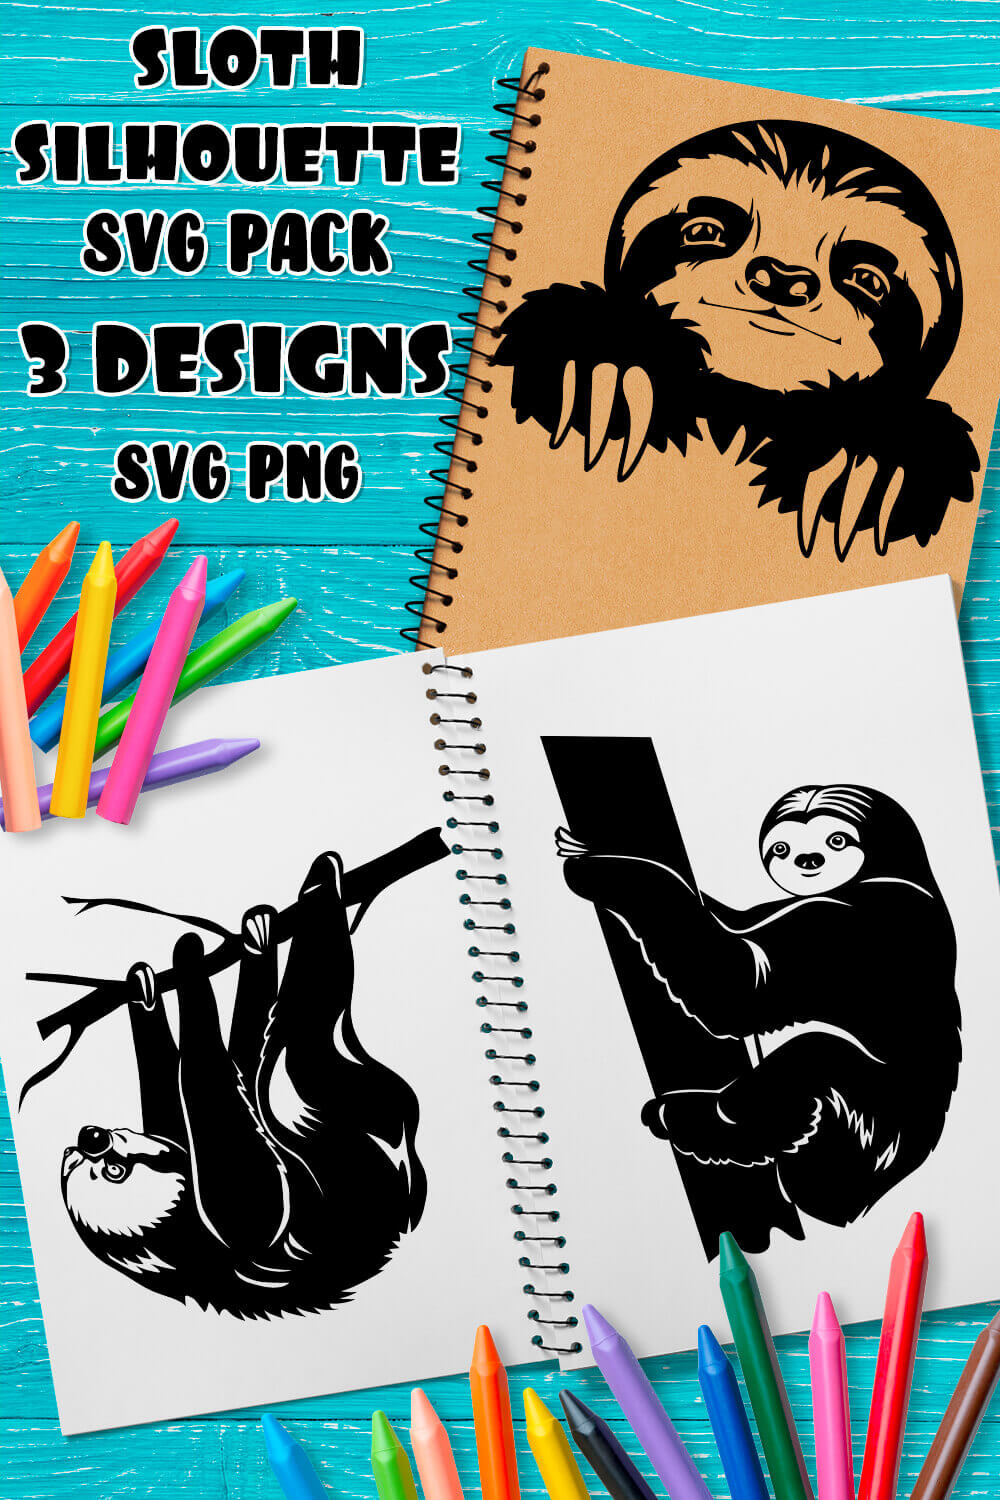 Notebook with a drawing of a sloth on it.